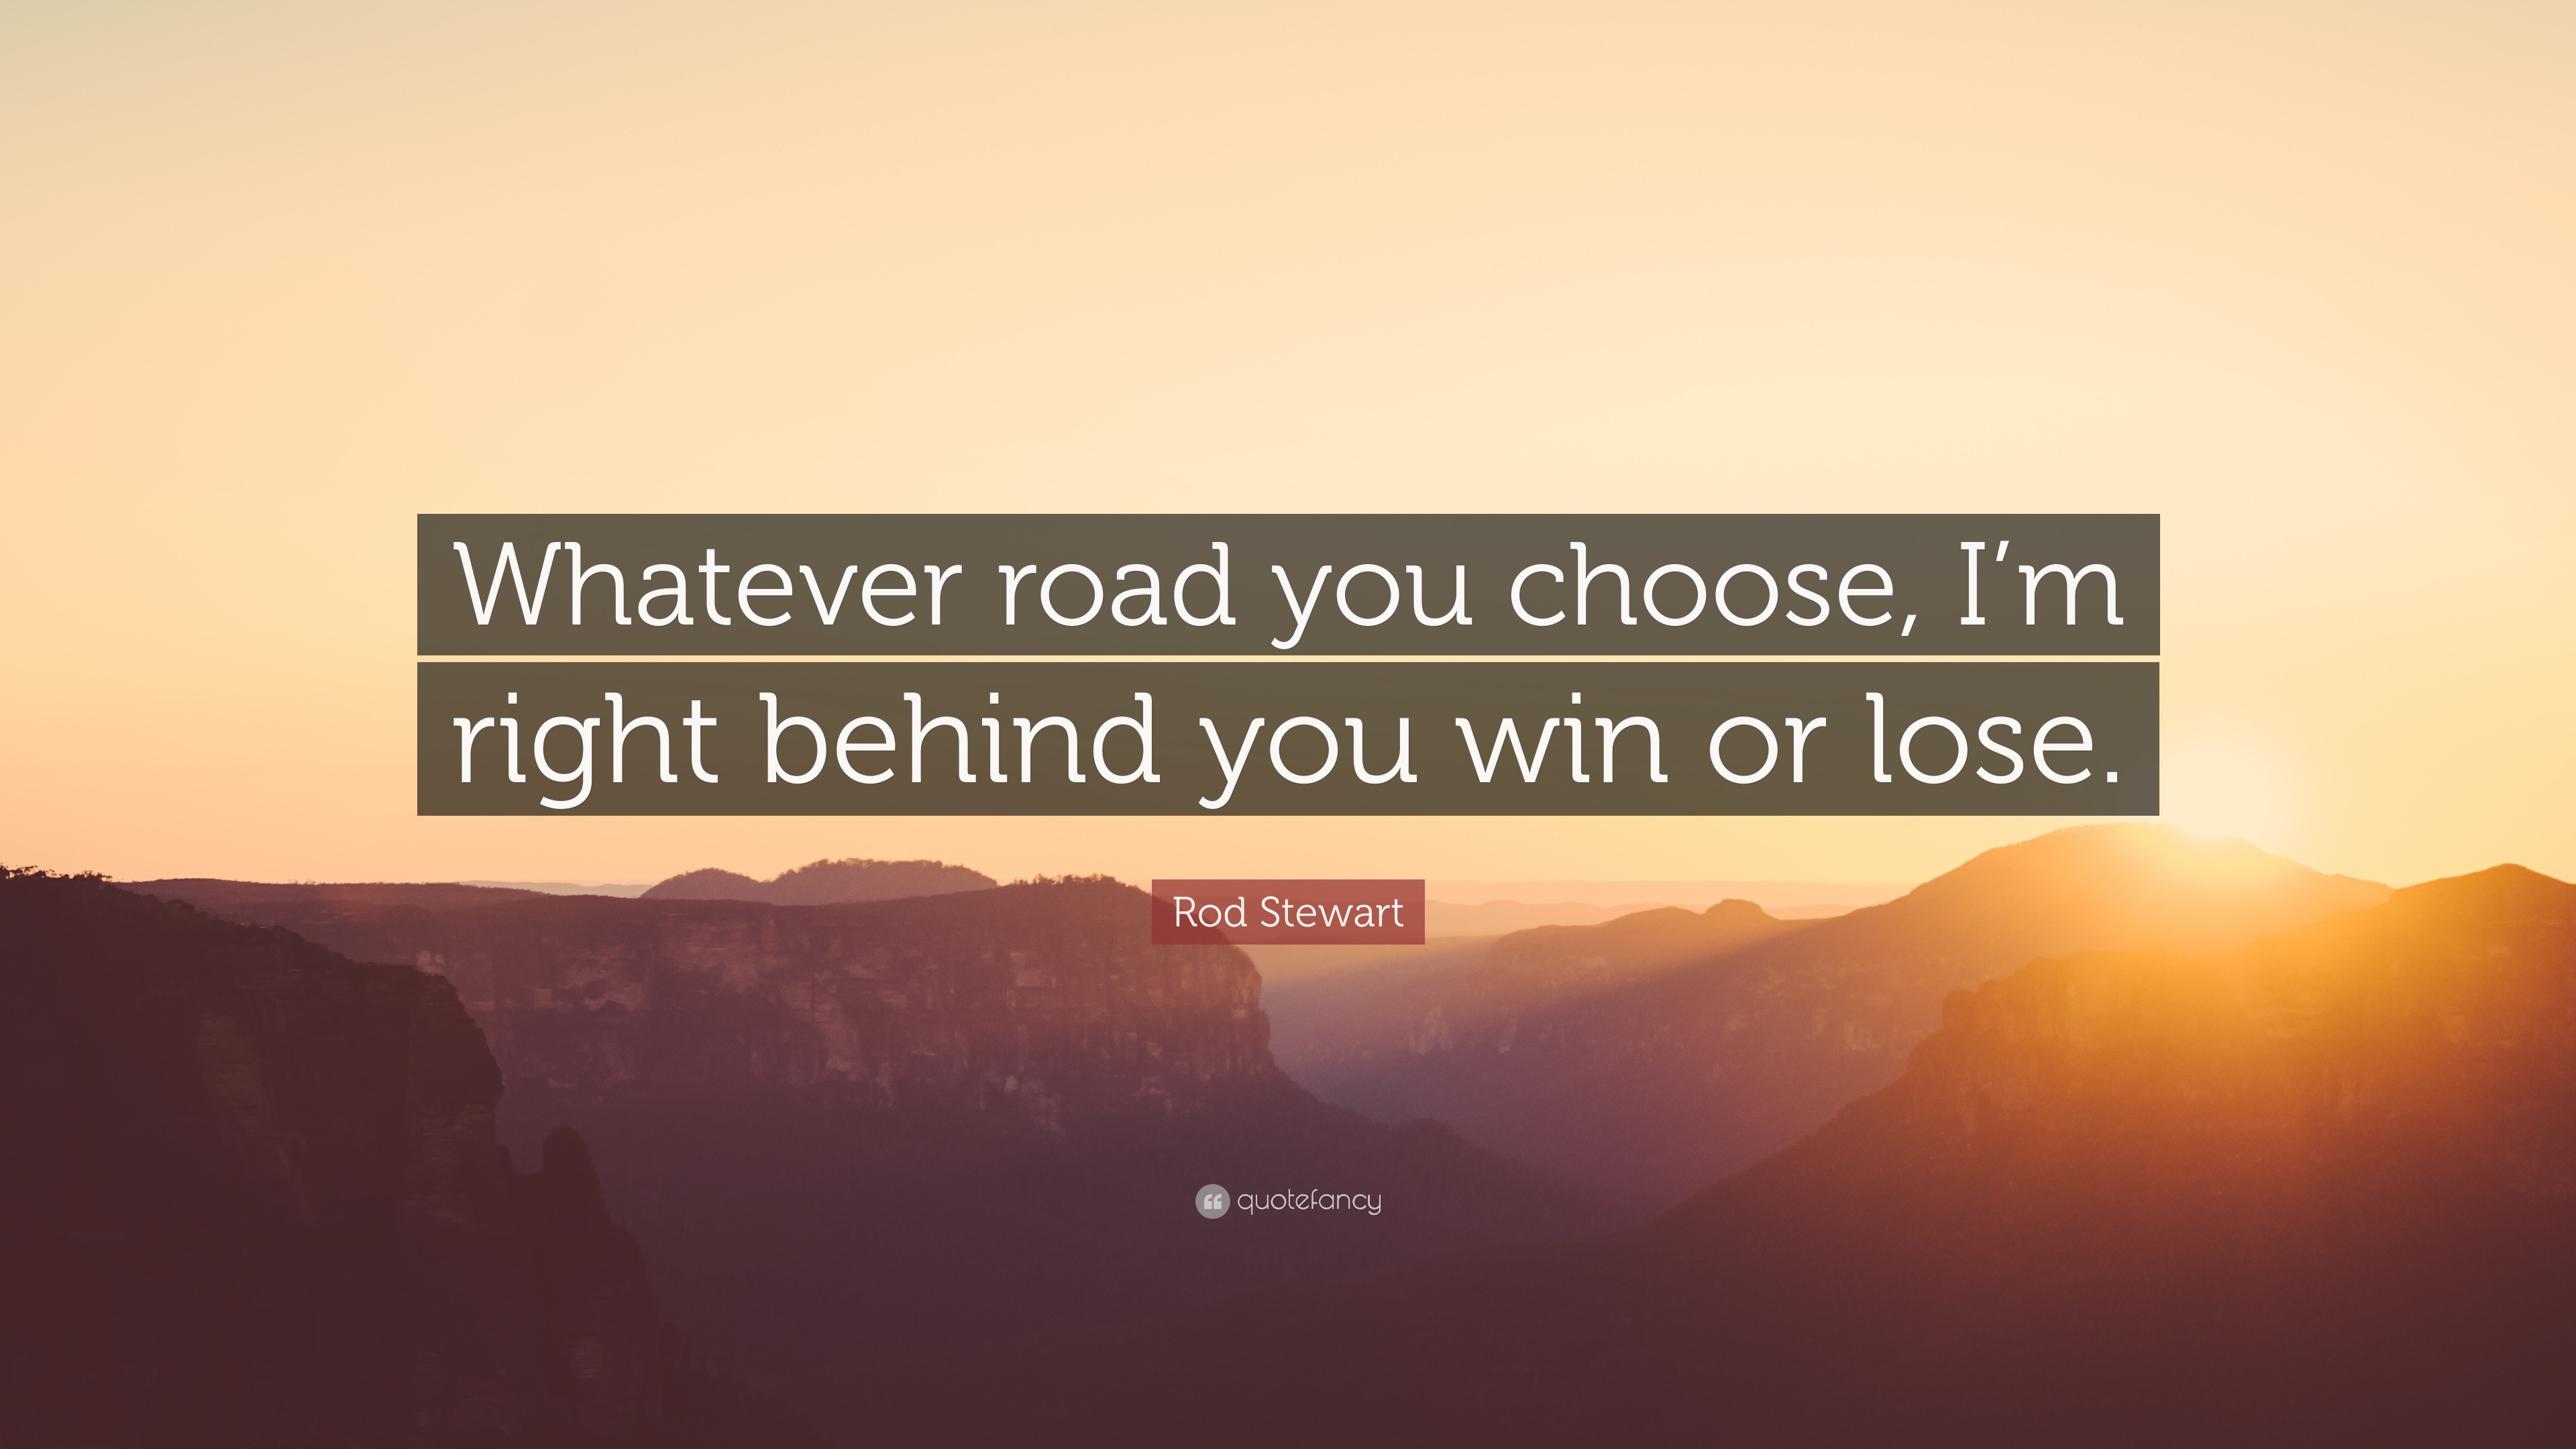 Rod Stewart Quote Whatever Road You Choose I M Right Behind You Win Or Lose